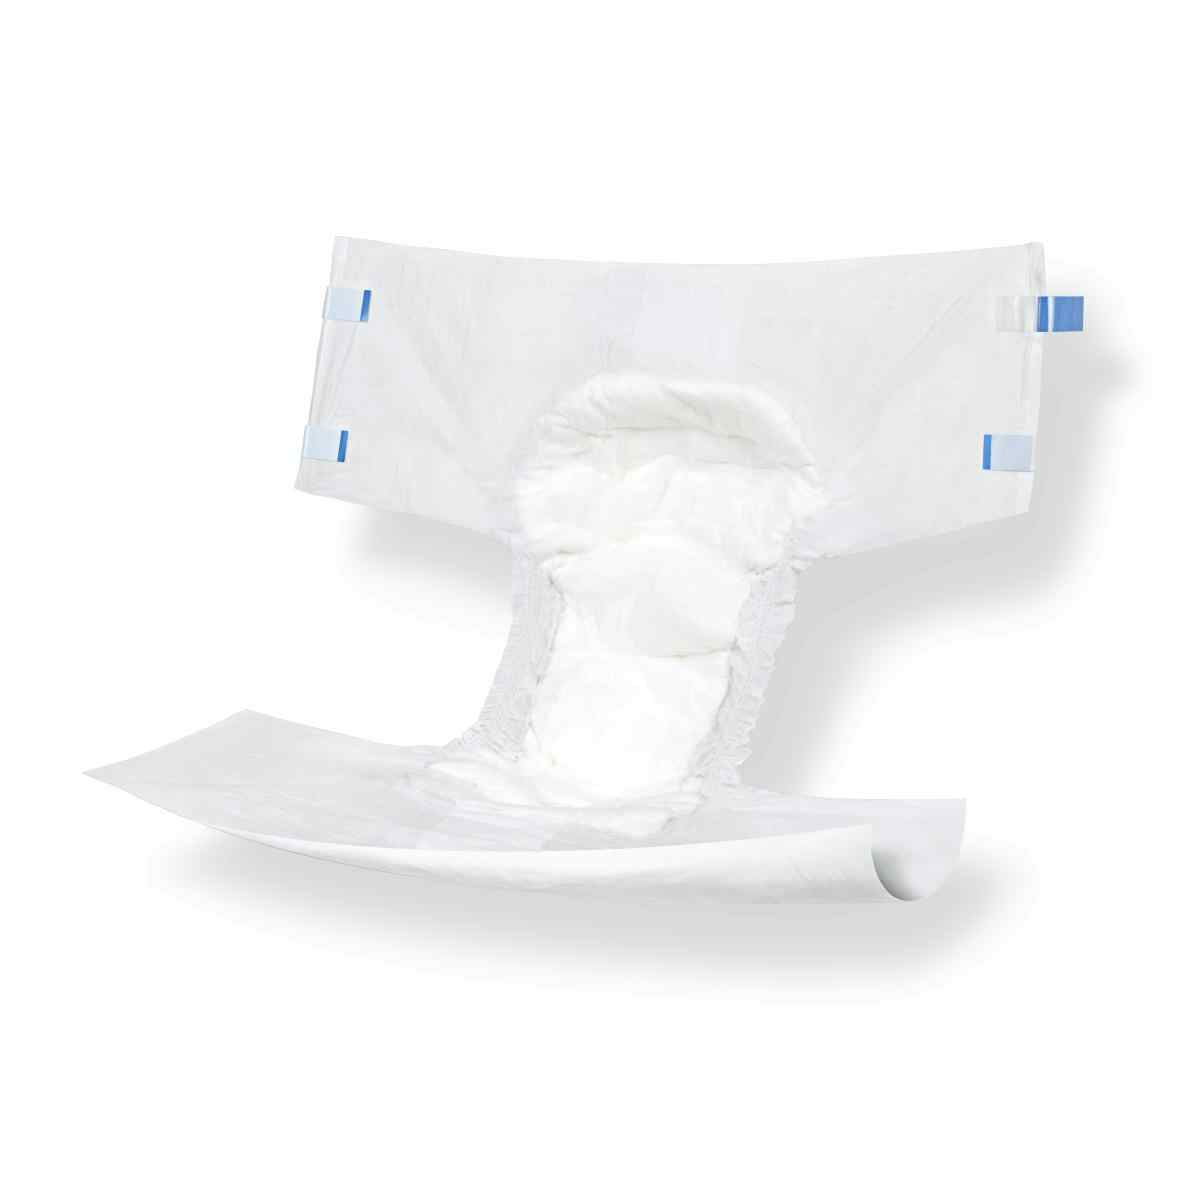 Medline Protection Plus Contoured Adult Briefs, Heavy Absorbency, MTB30300, M (32"-42") - Case of 96